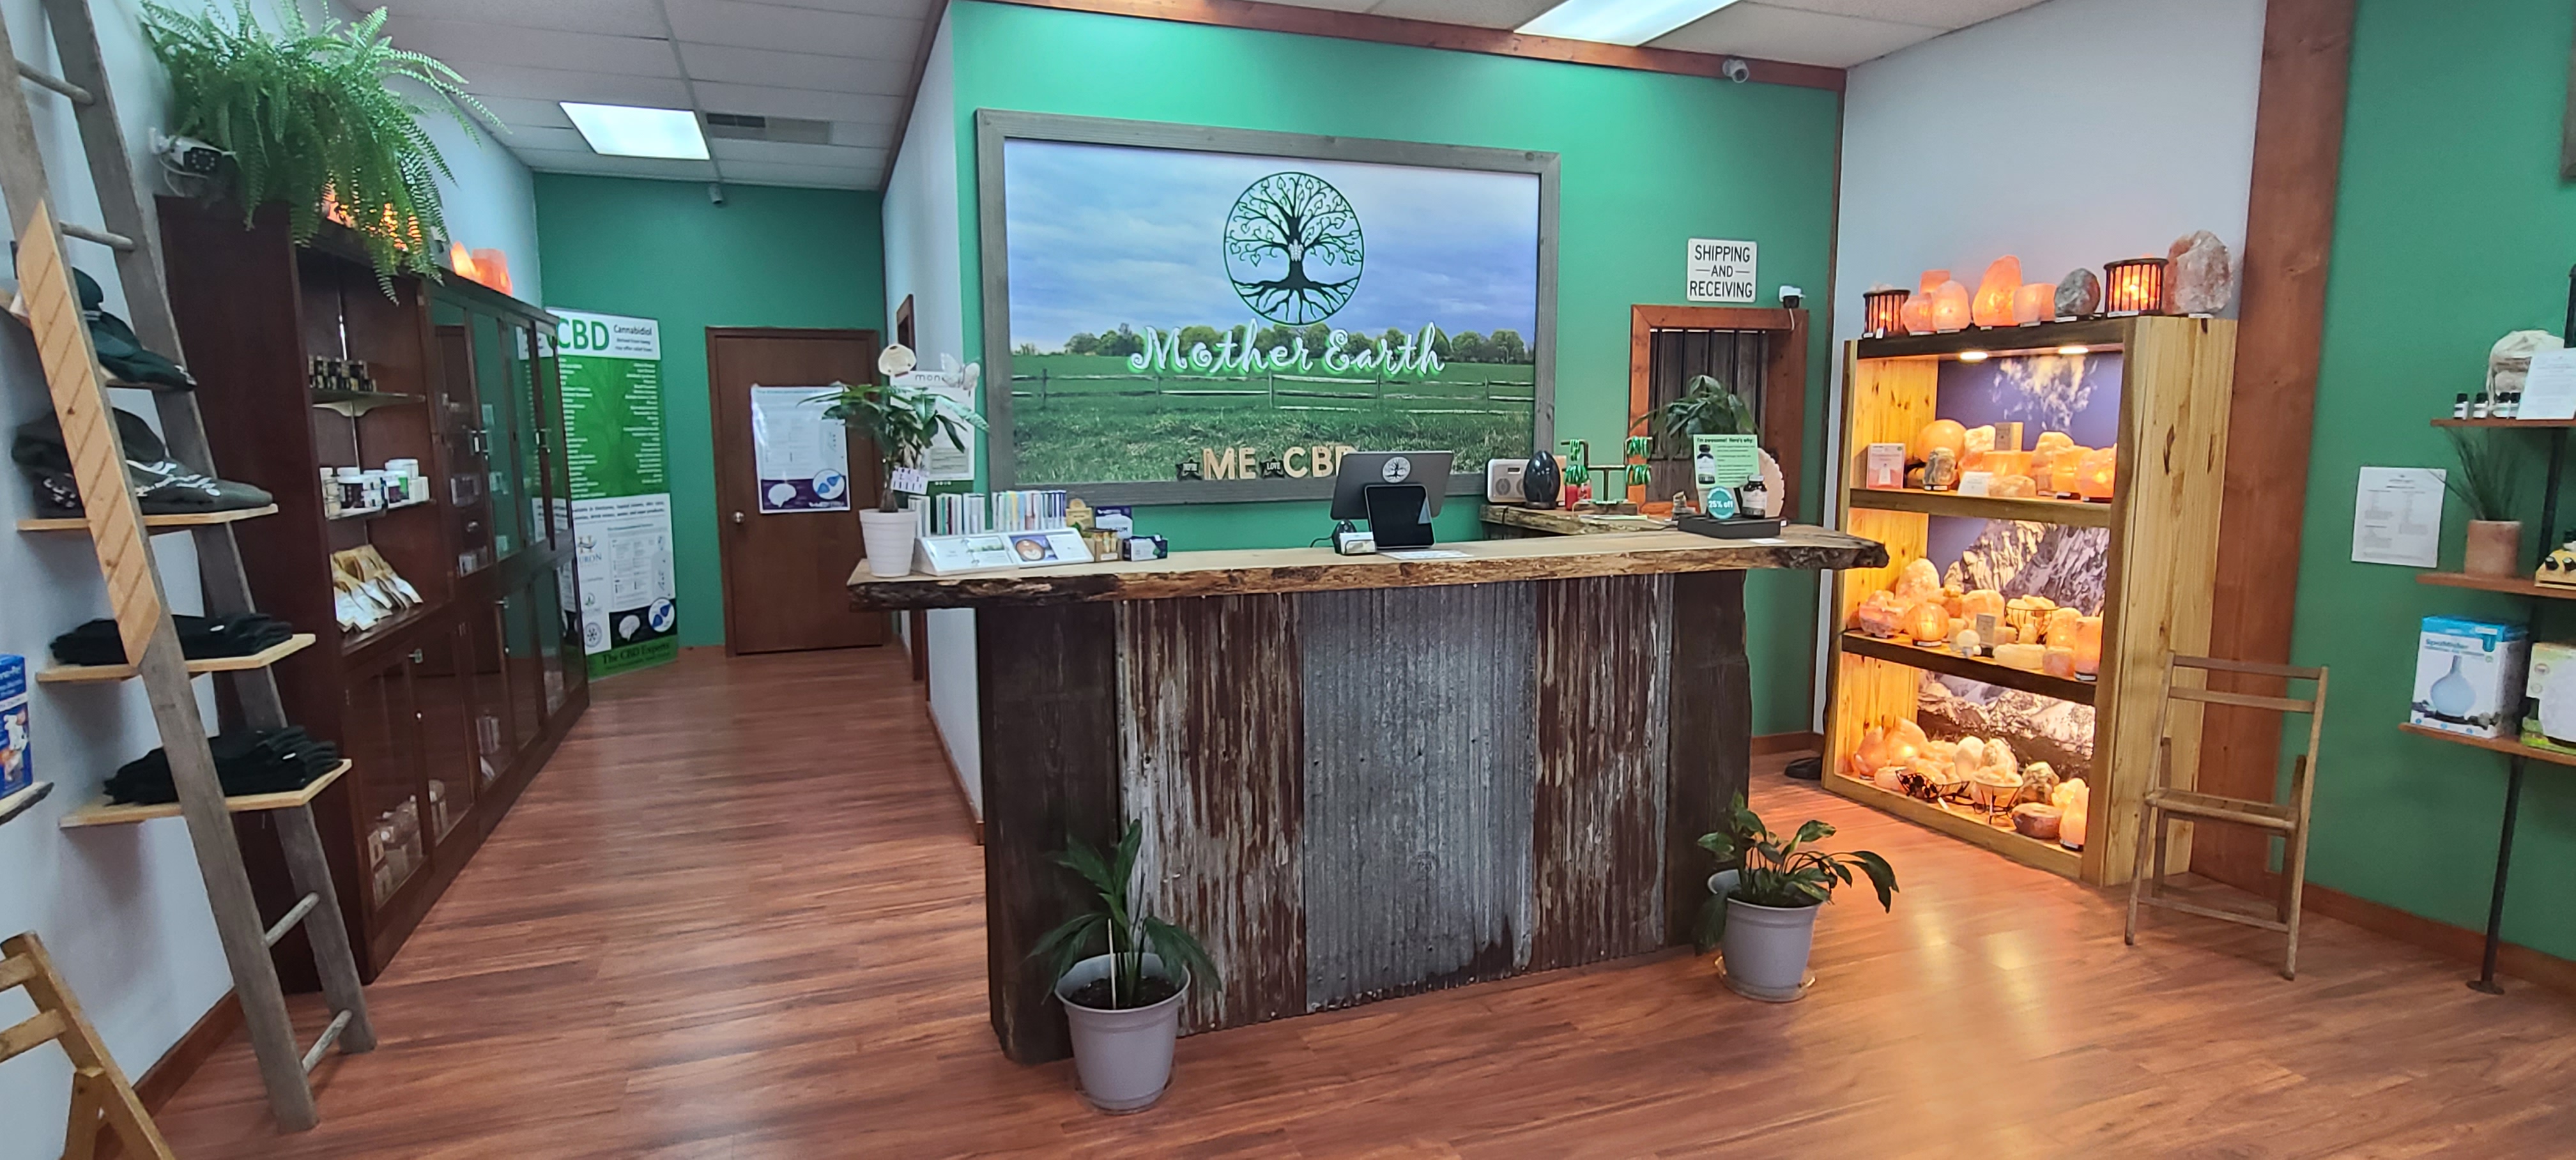 CBD Store - New Haven, MI in Macomb County - Mother Earth Natural Health